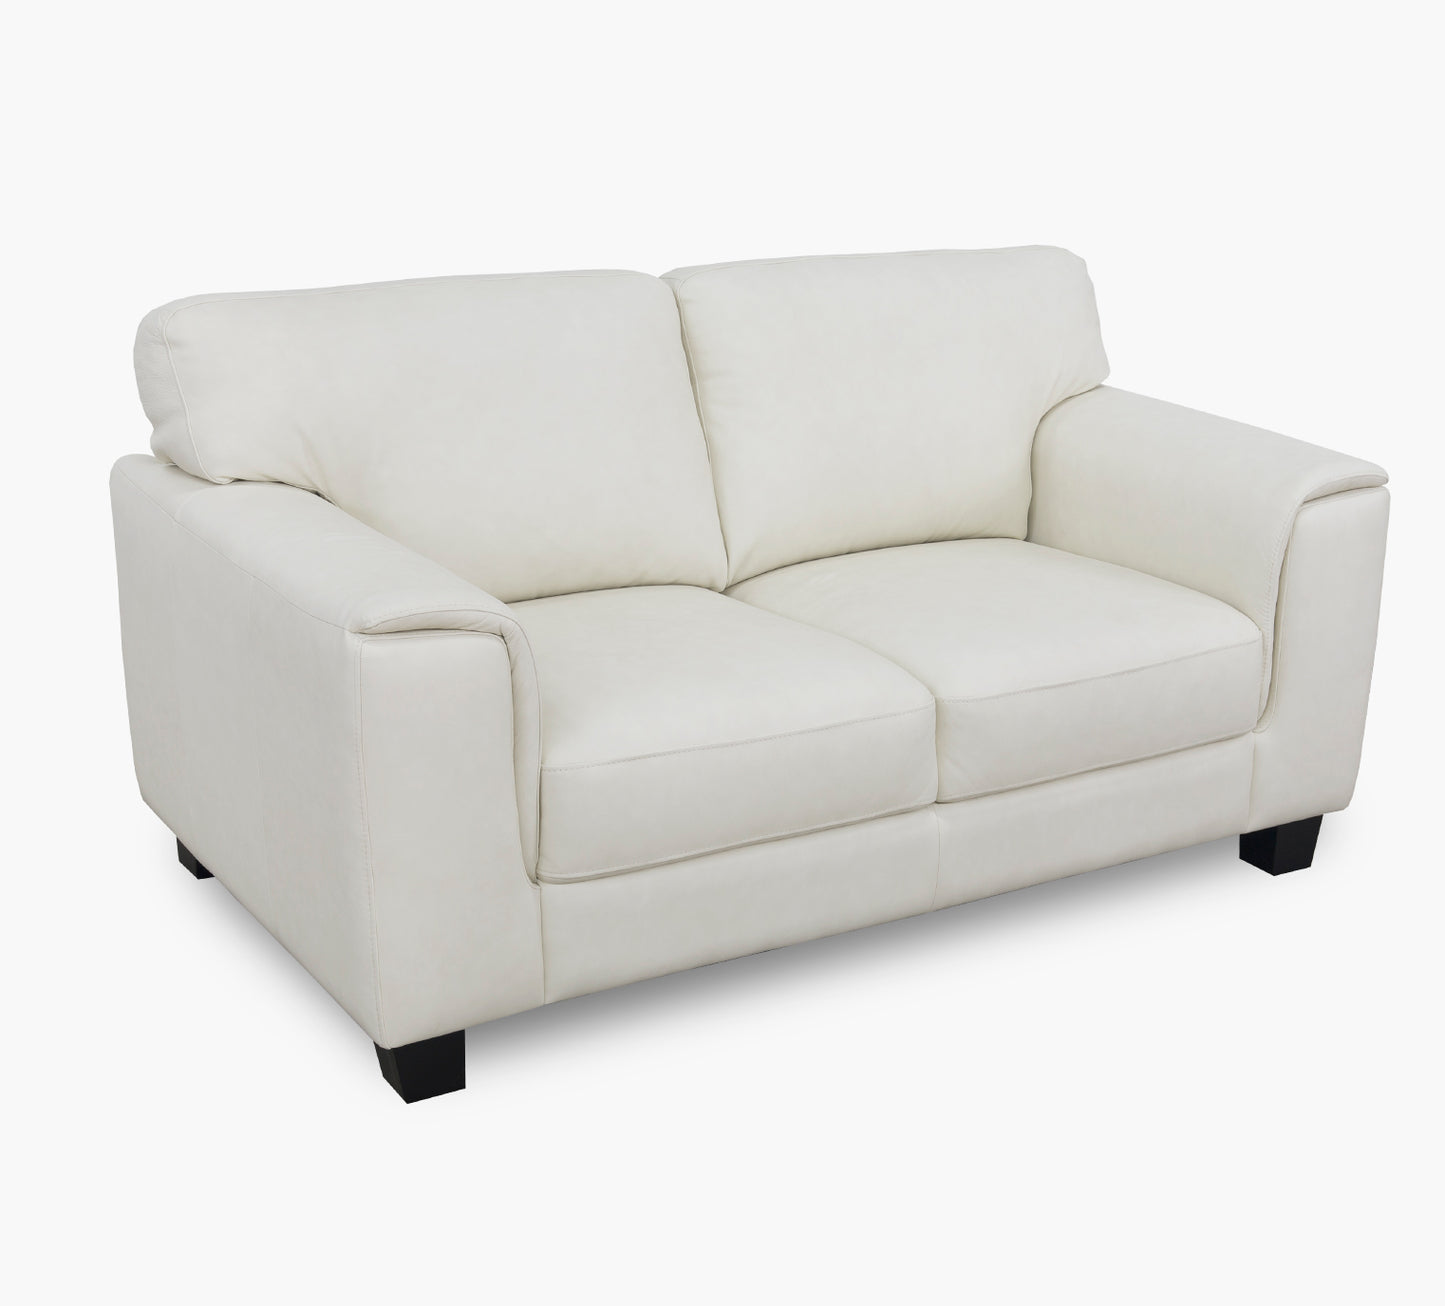 Stetson Ivory Leather Loveseat